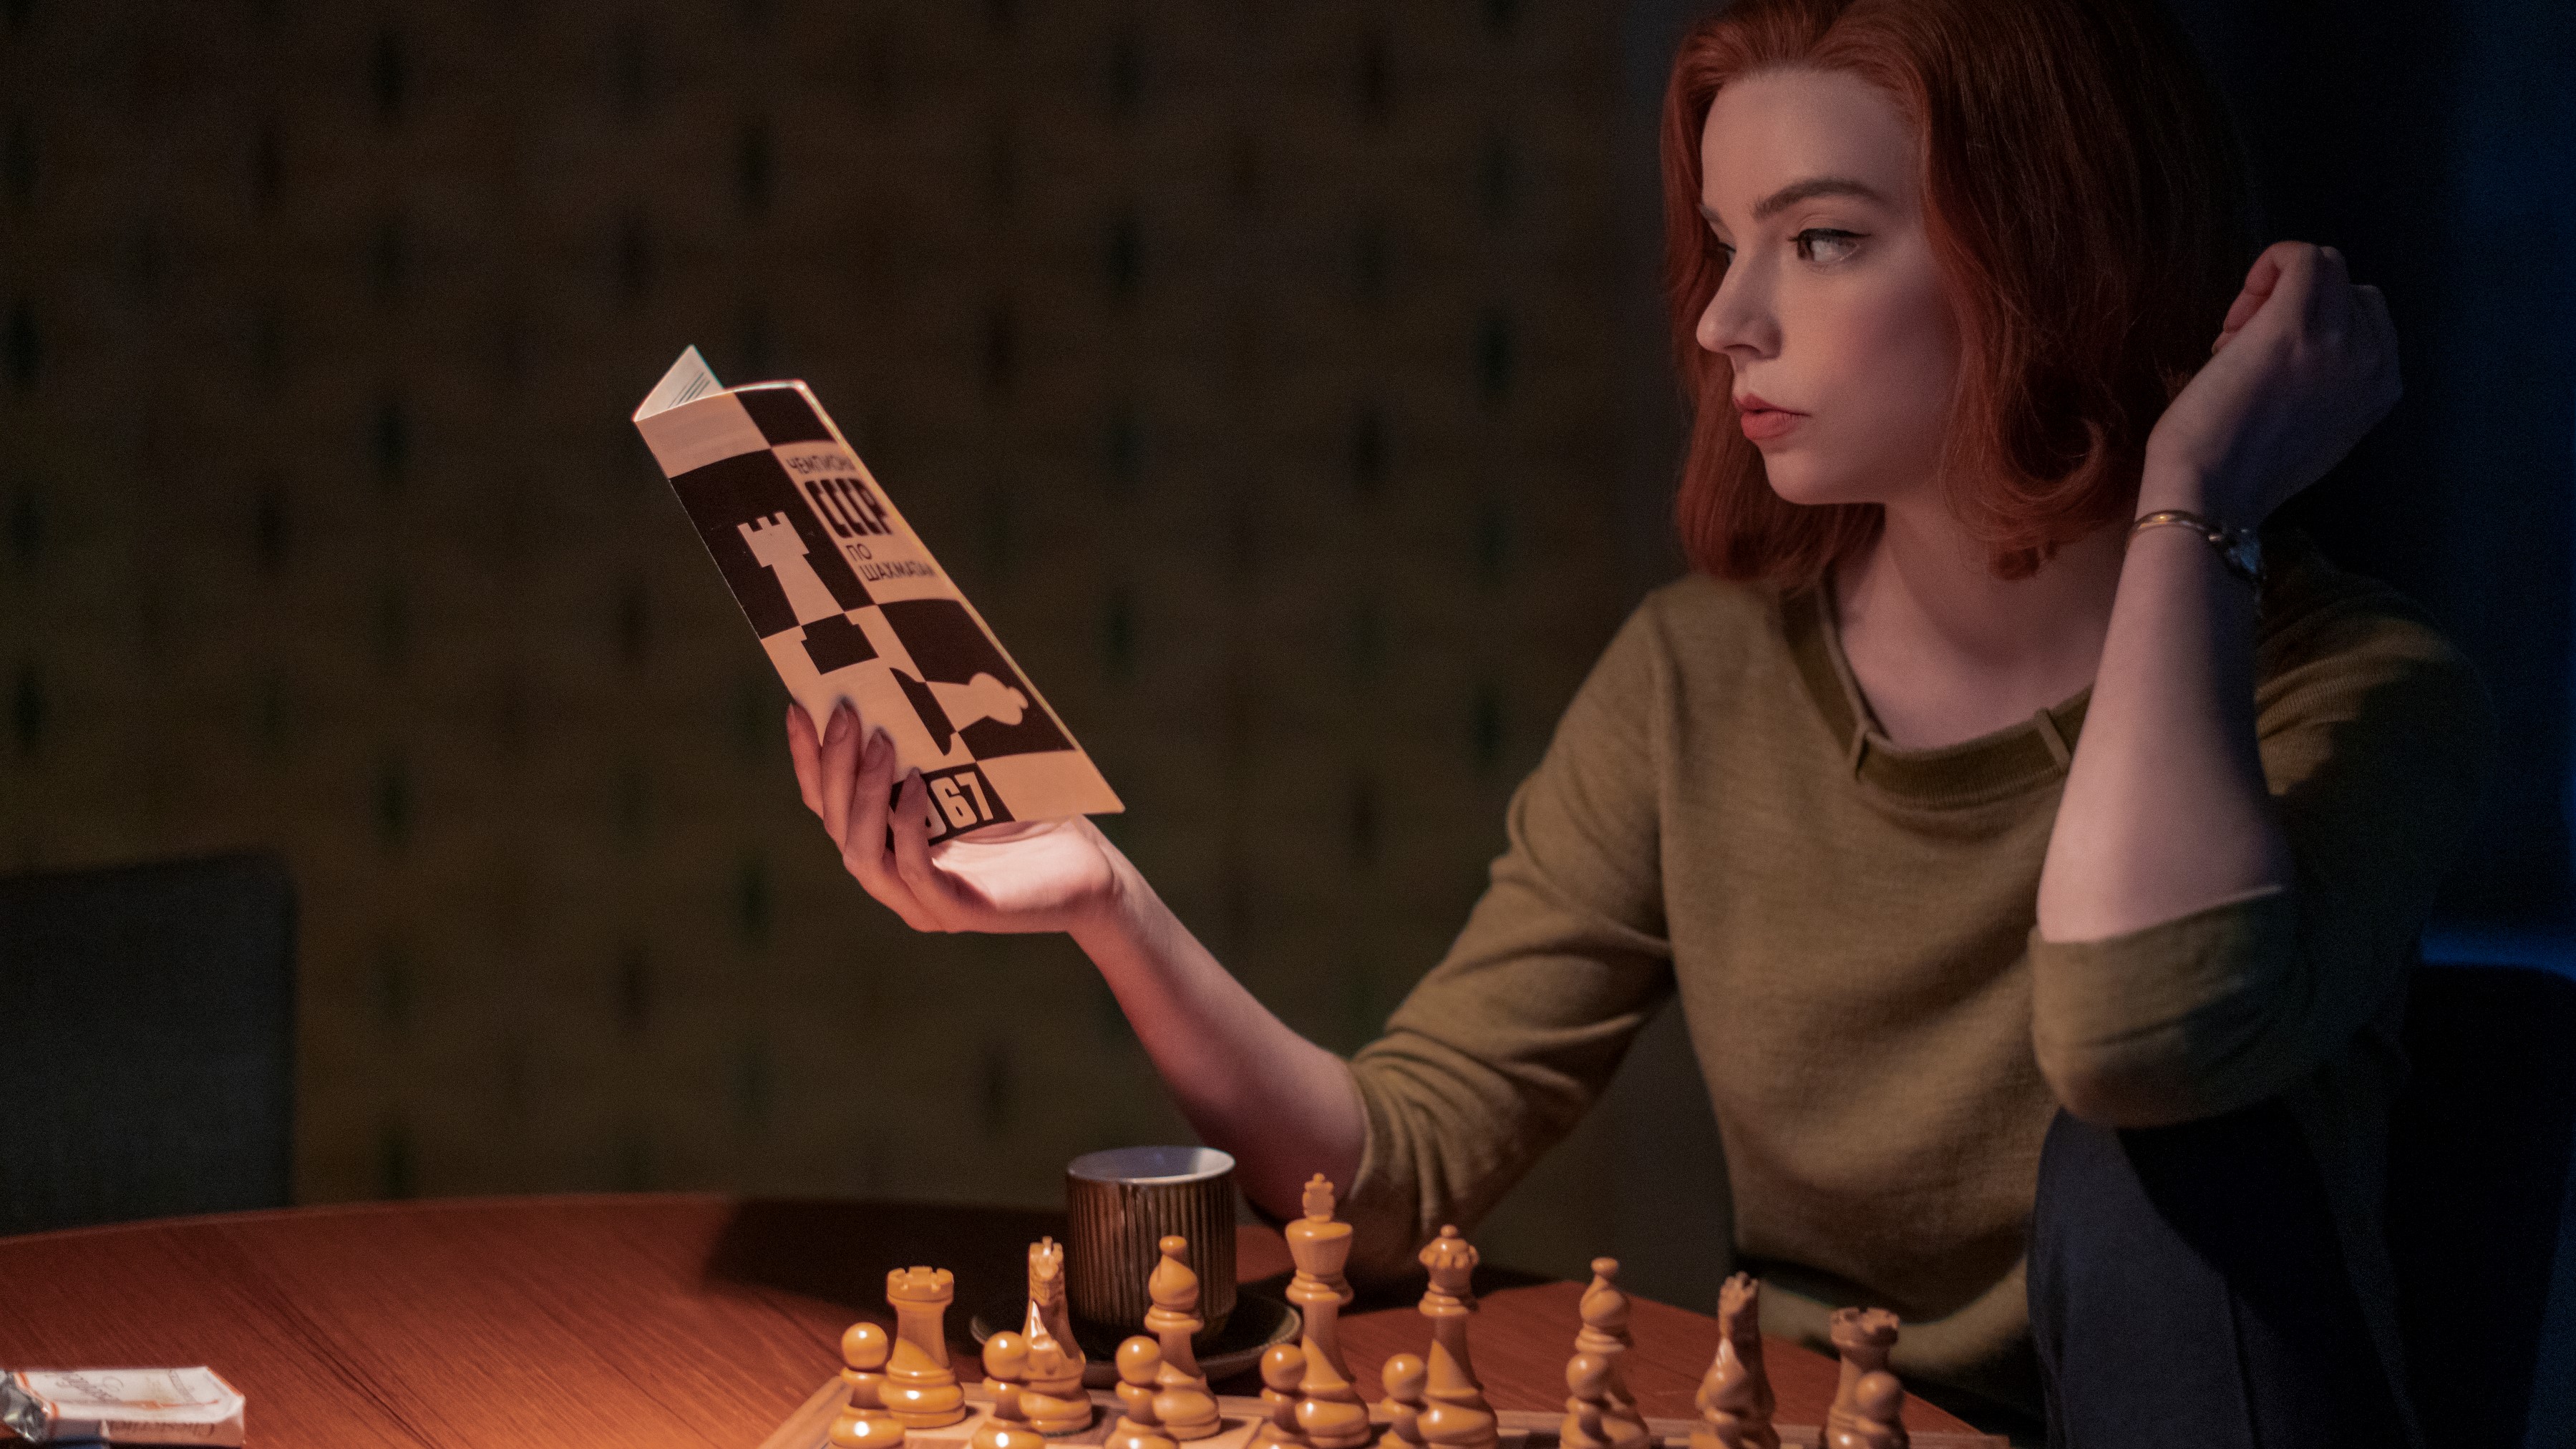 The Queen's Gambit: What to Know About Netflix's New Show